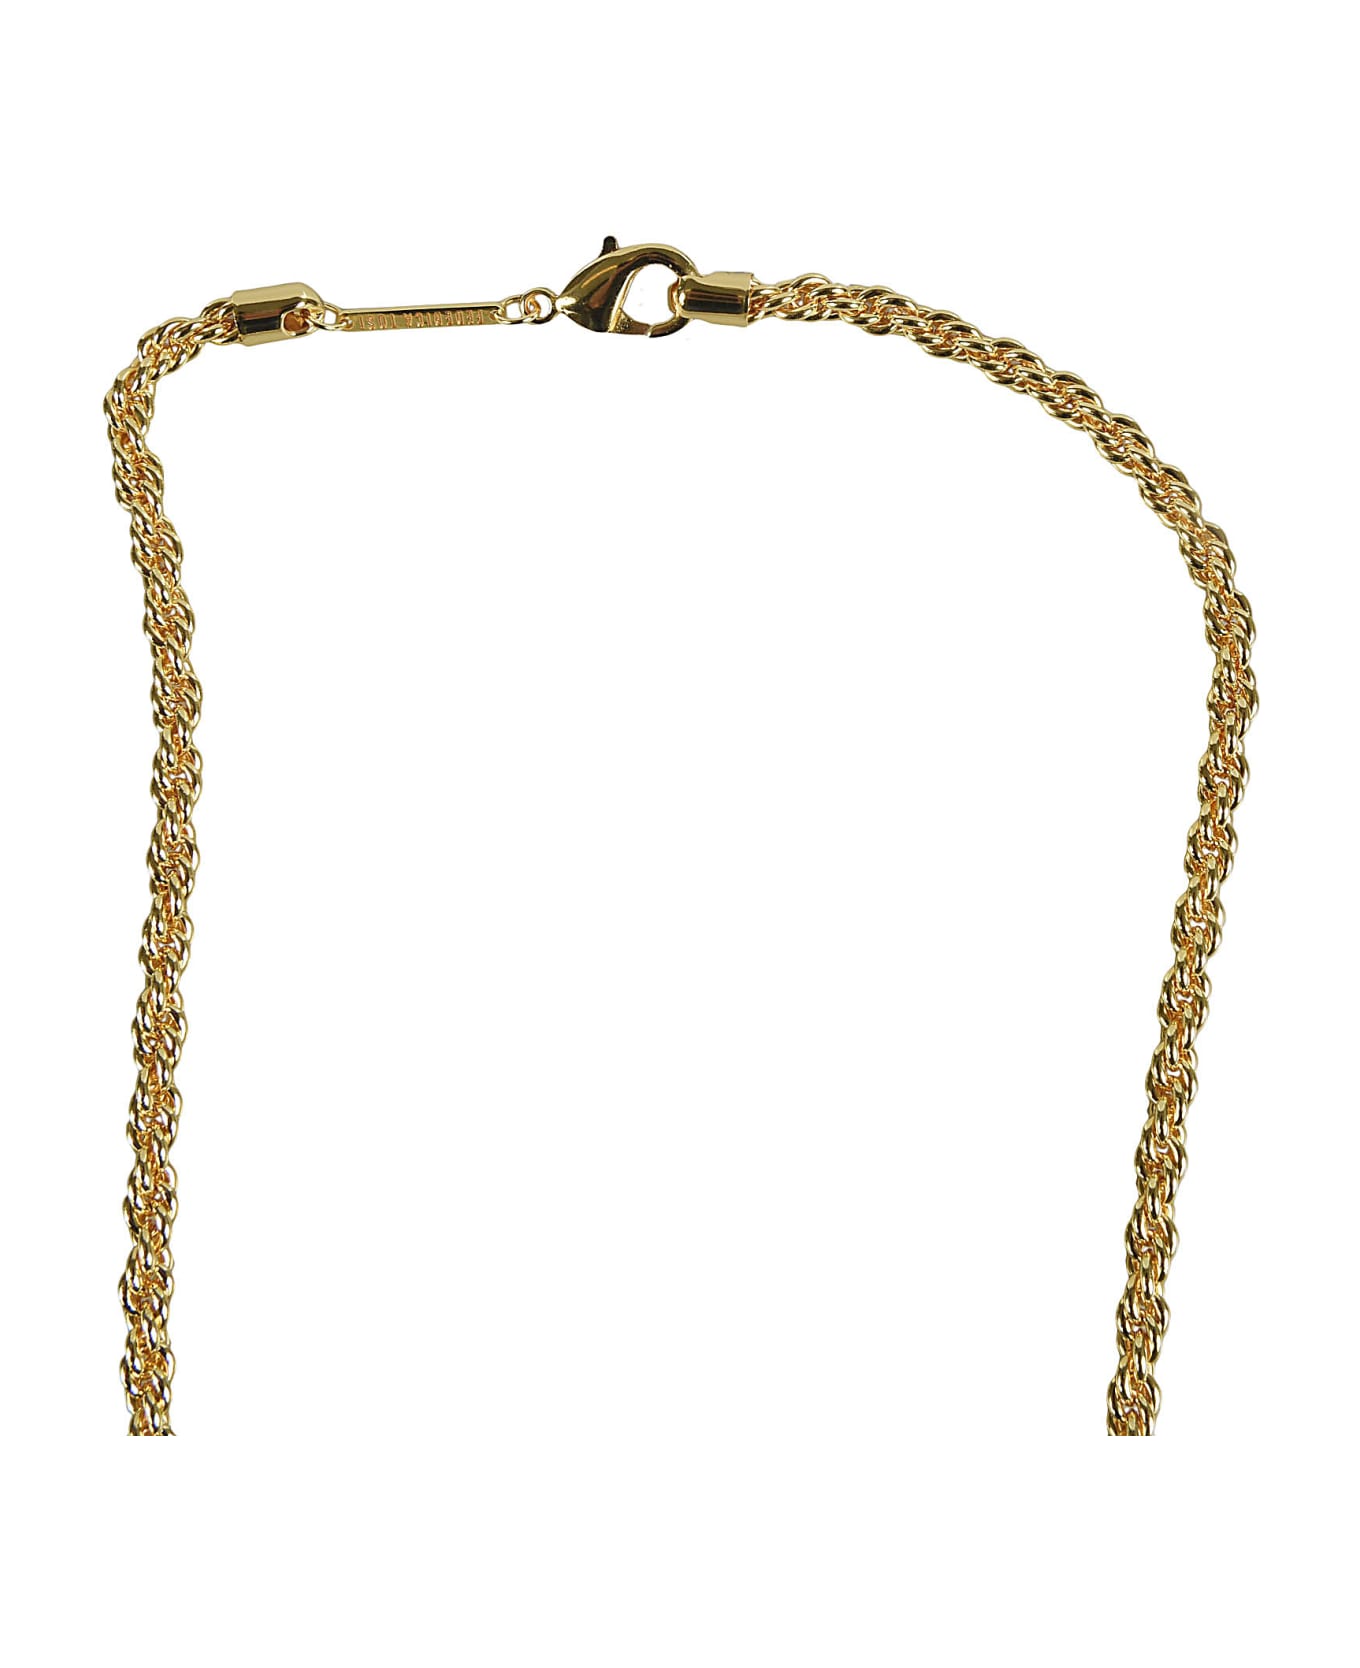 Federica Tosi 'grace' Gold-plated Texturized Necklace With Clasp Fastening In 18k Gold Plated Bronze Woman - Golden